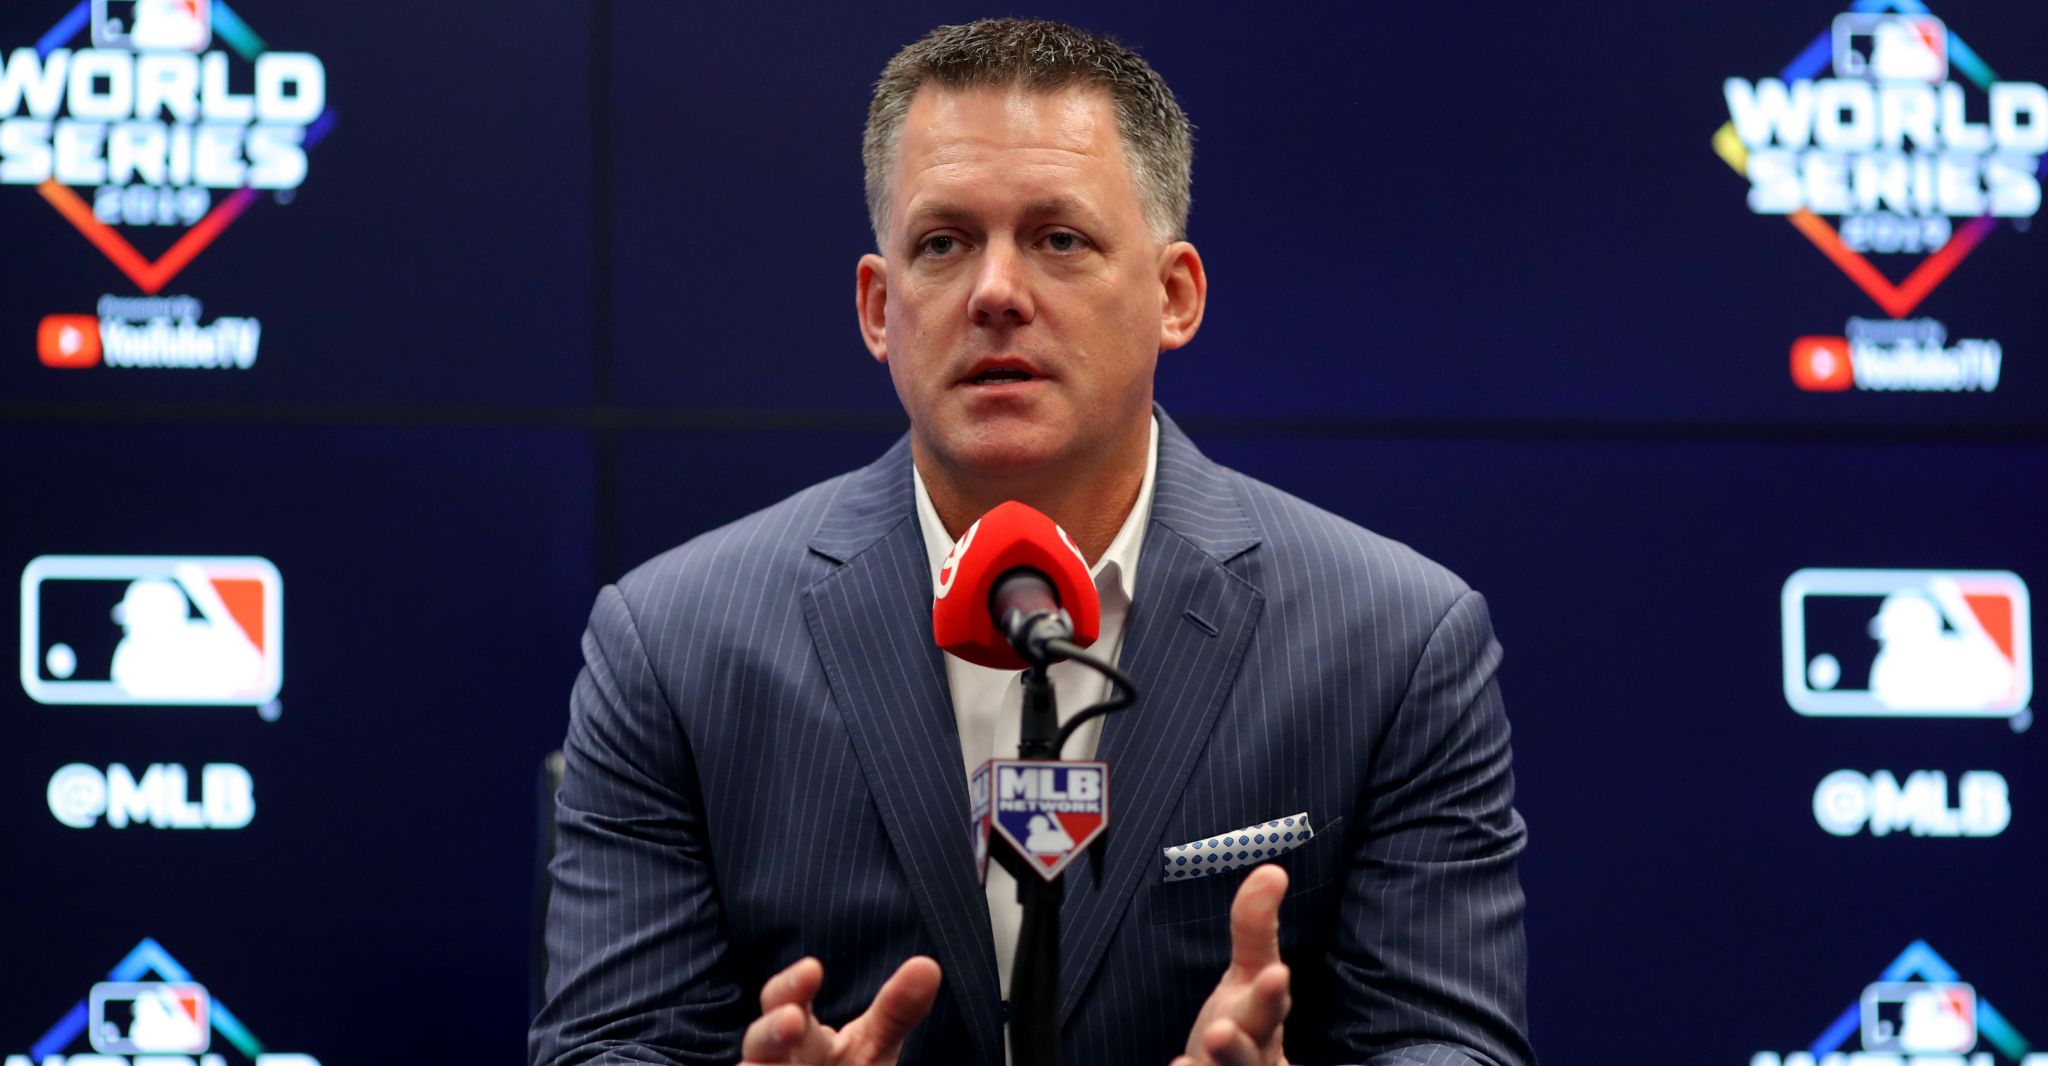 World Series win almost (kind of) cost Astros manager A.J. Hinch a friend